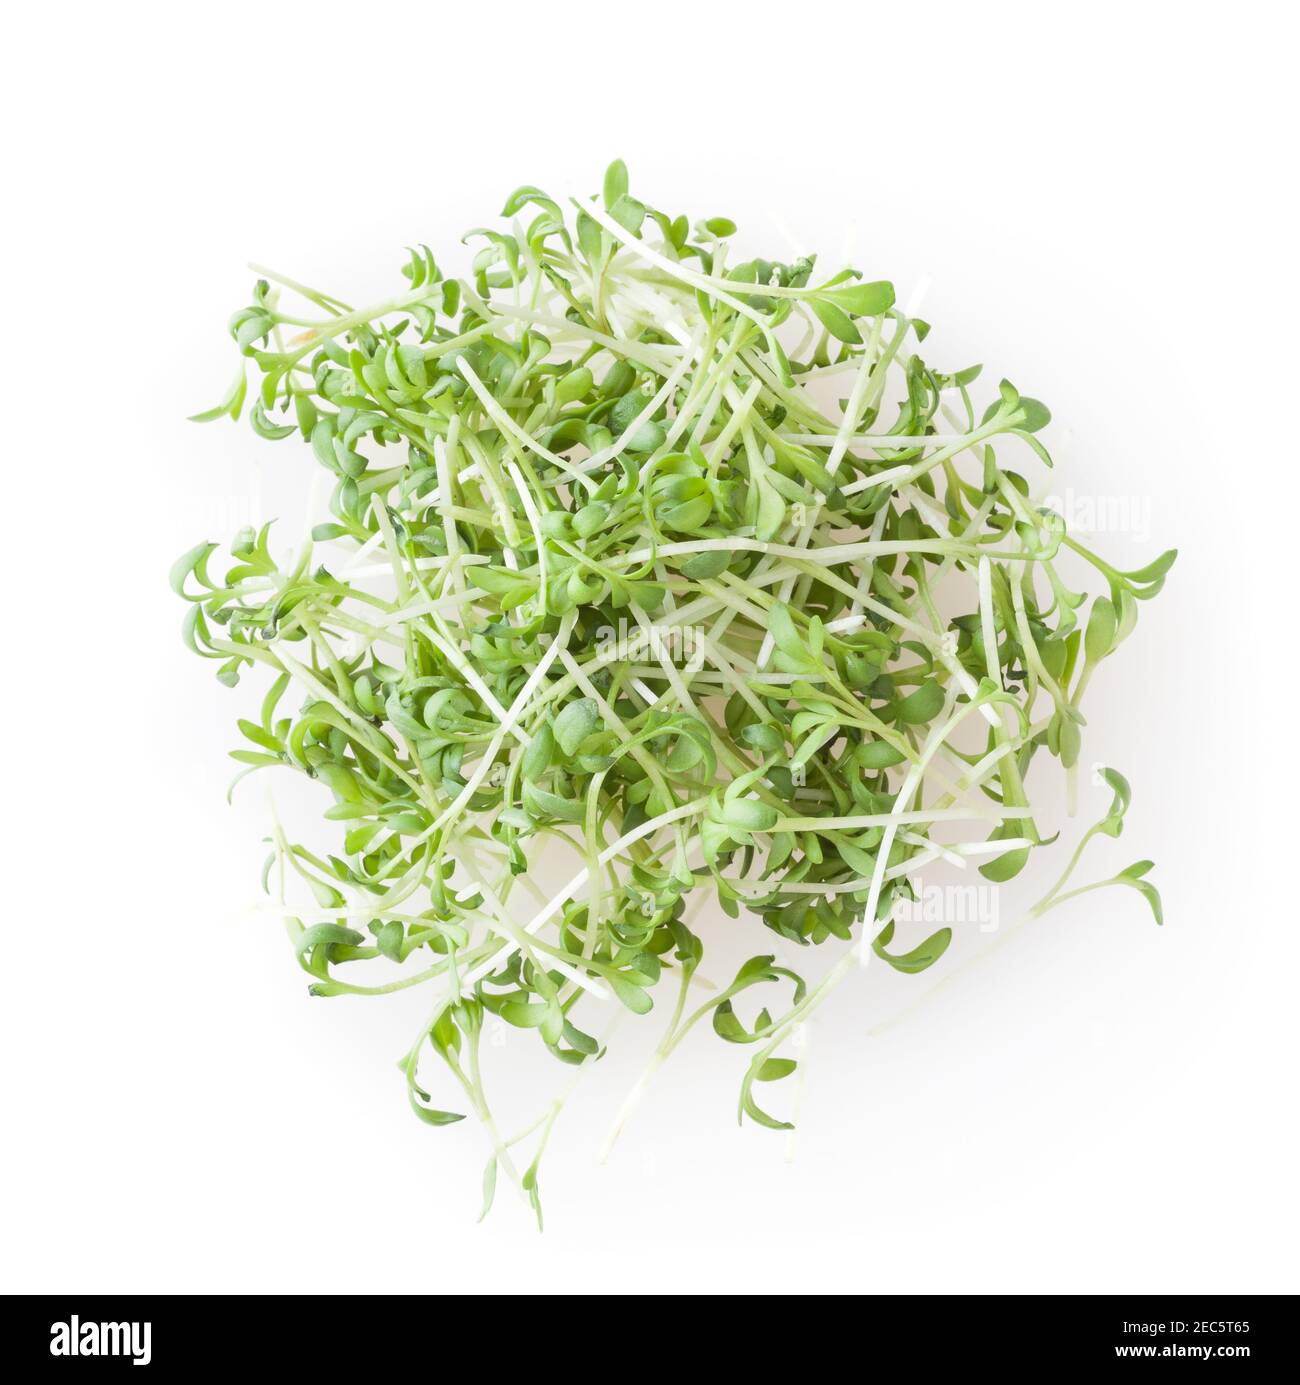 Heap of micro greens garden cress sprouts isolated on white background Stock Photo